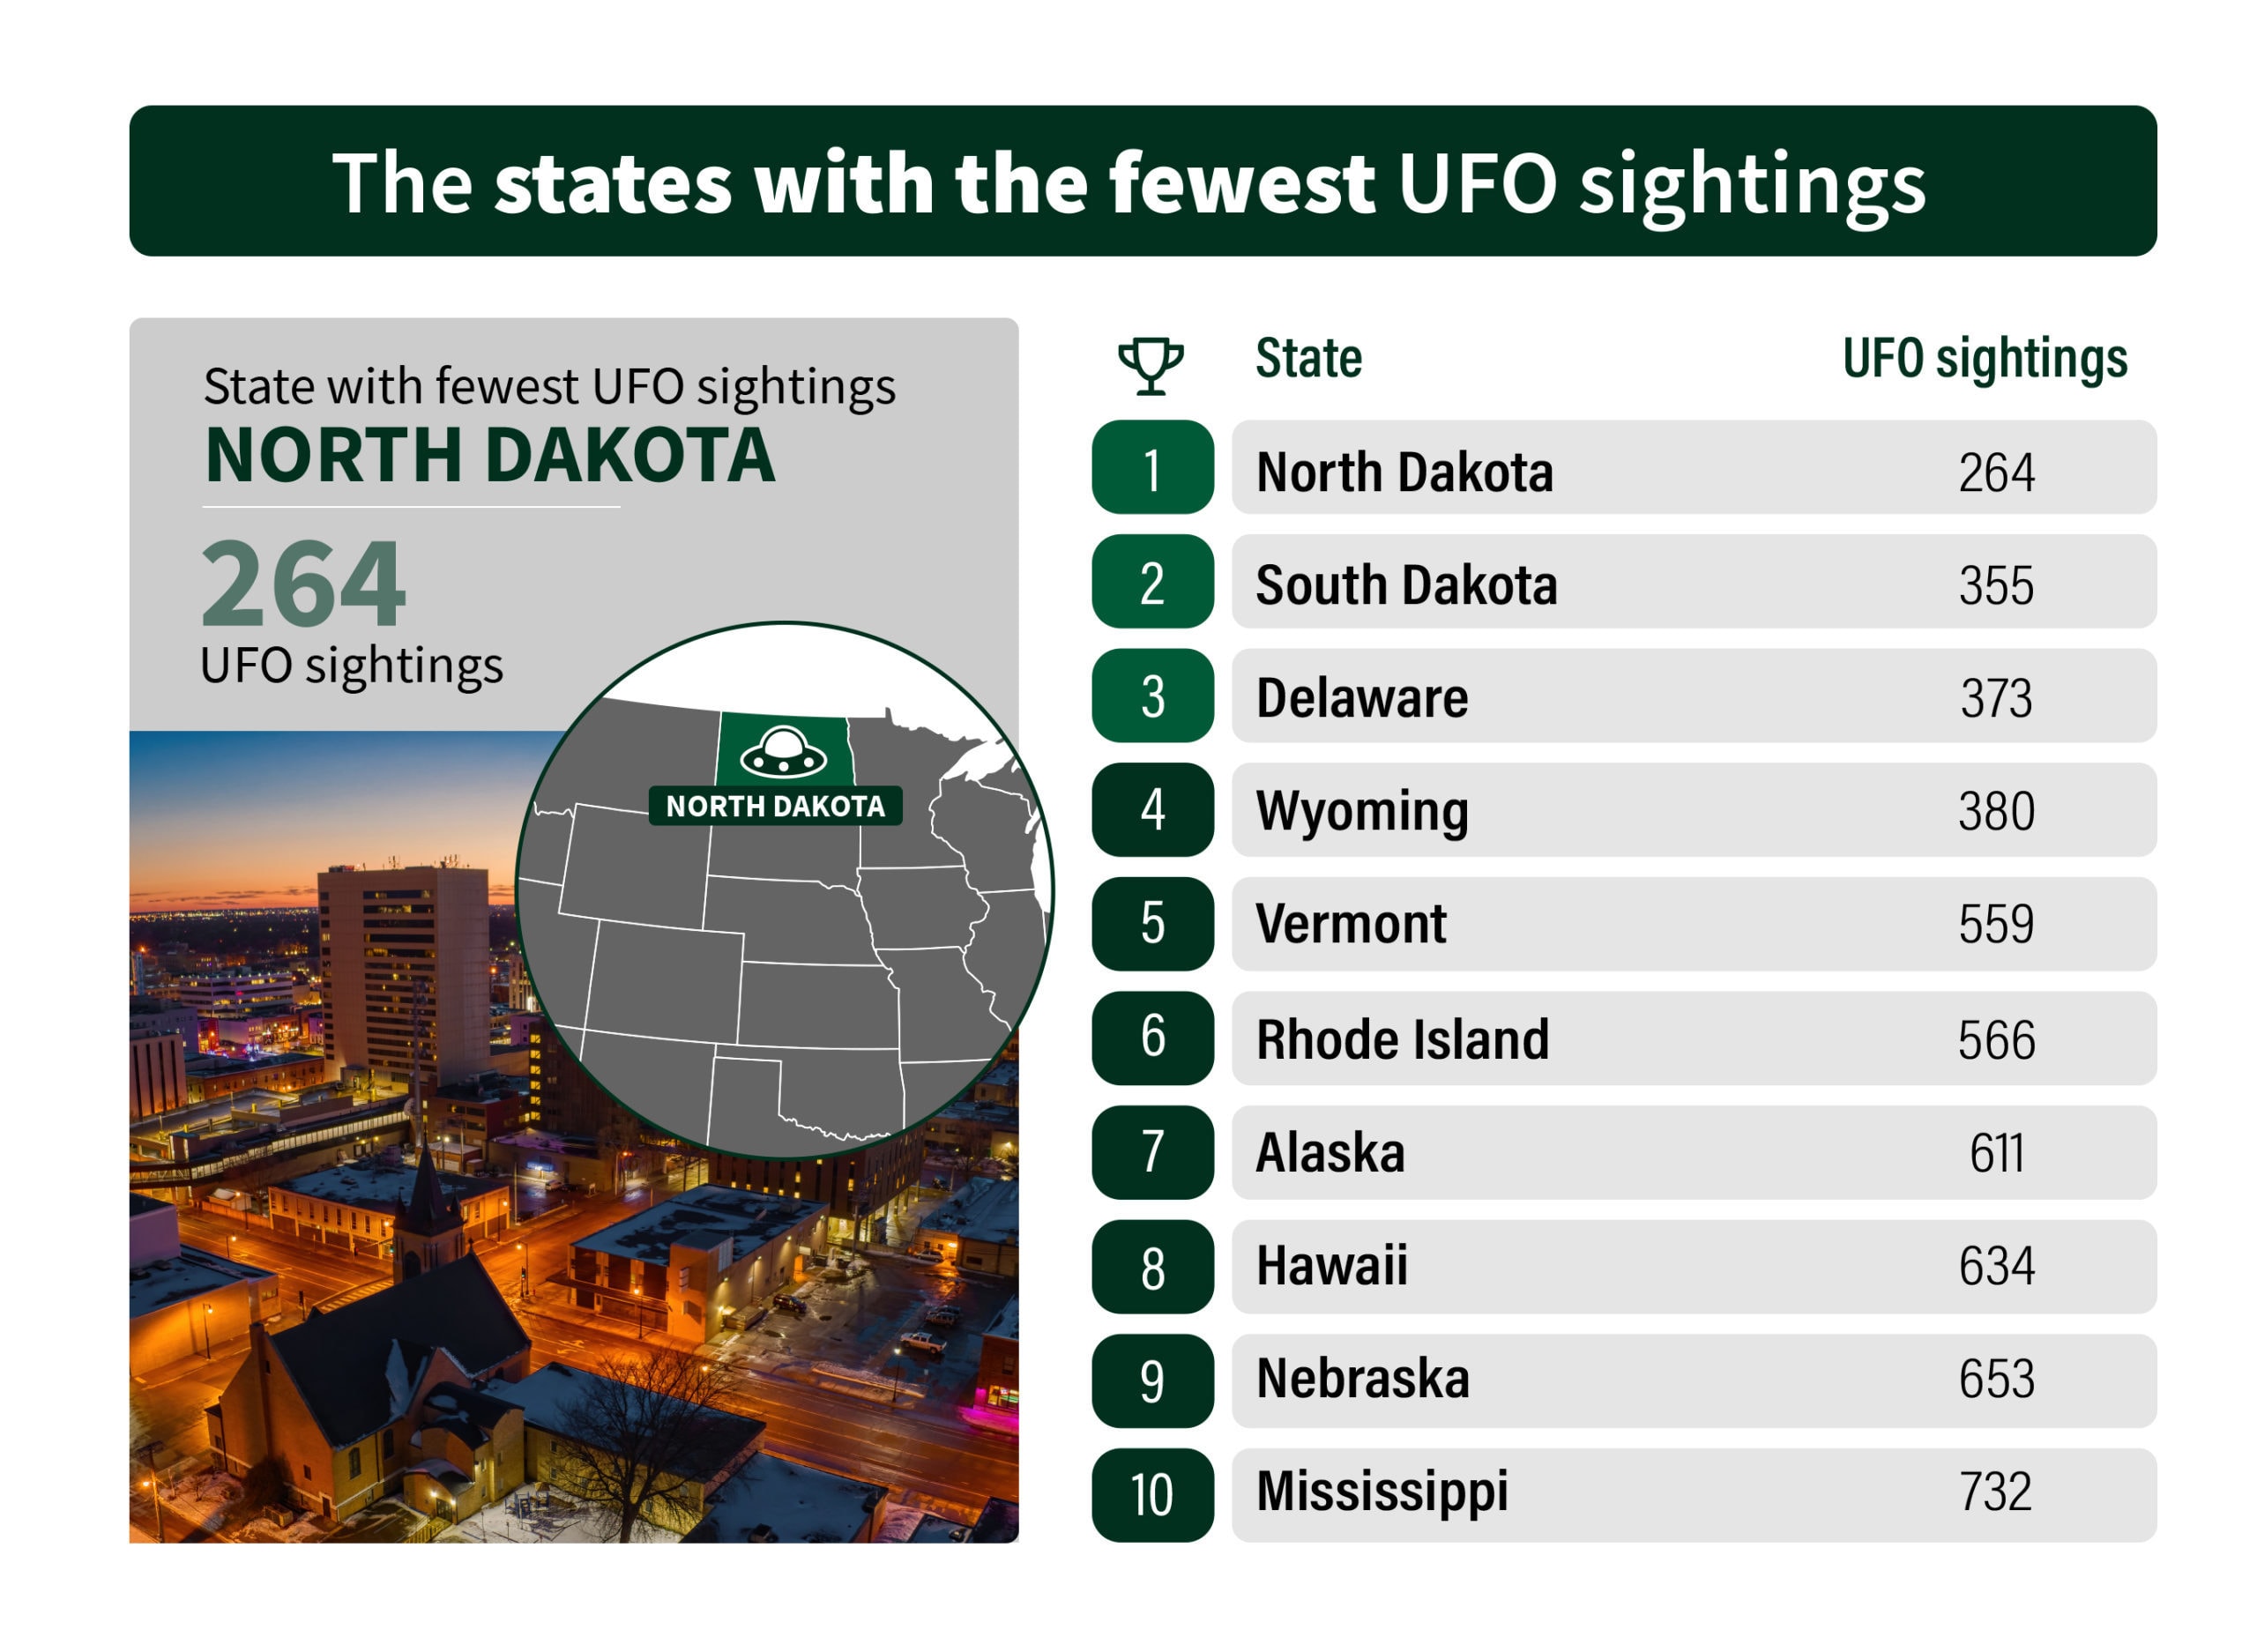 infographic about the states with the fewest UFO sightinggs or extraterrestrial encounters in the USA